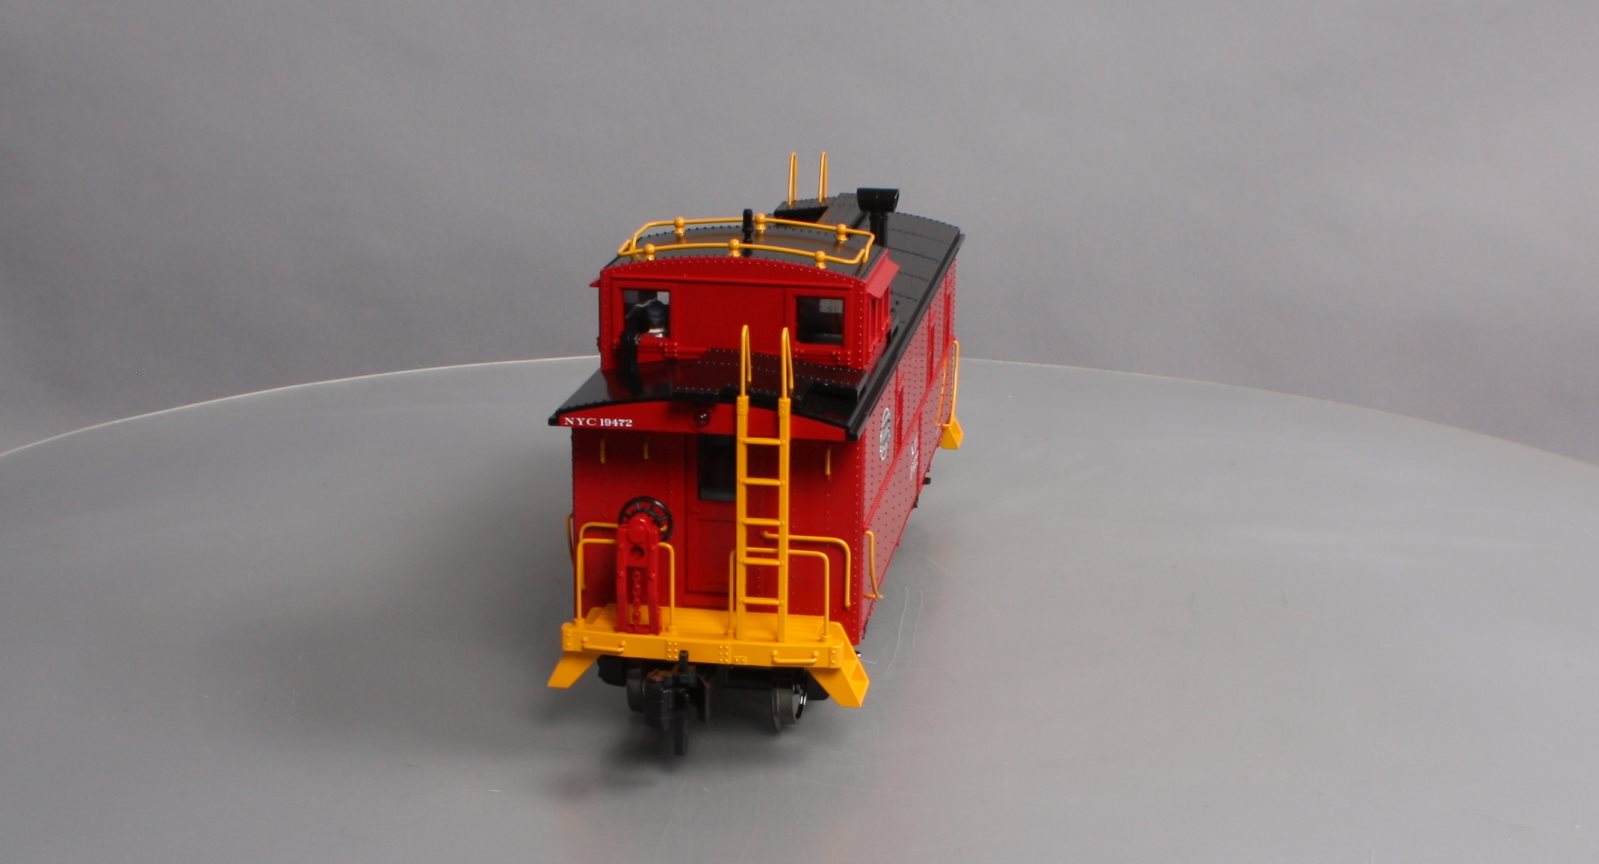 MTH 70-77032 G New York Central Offset Steel Caboose Car